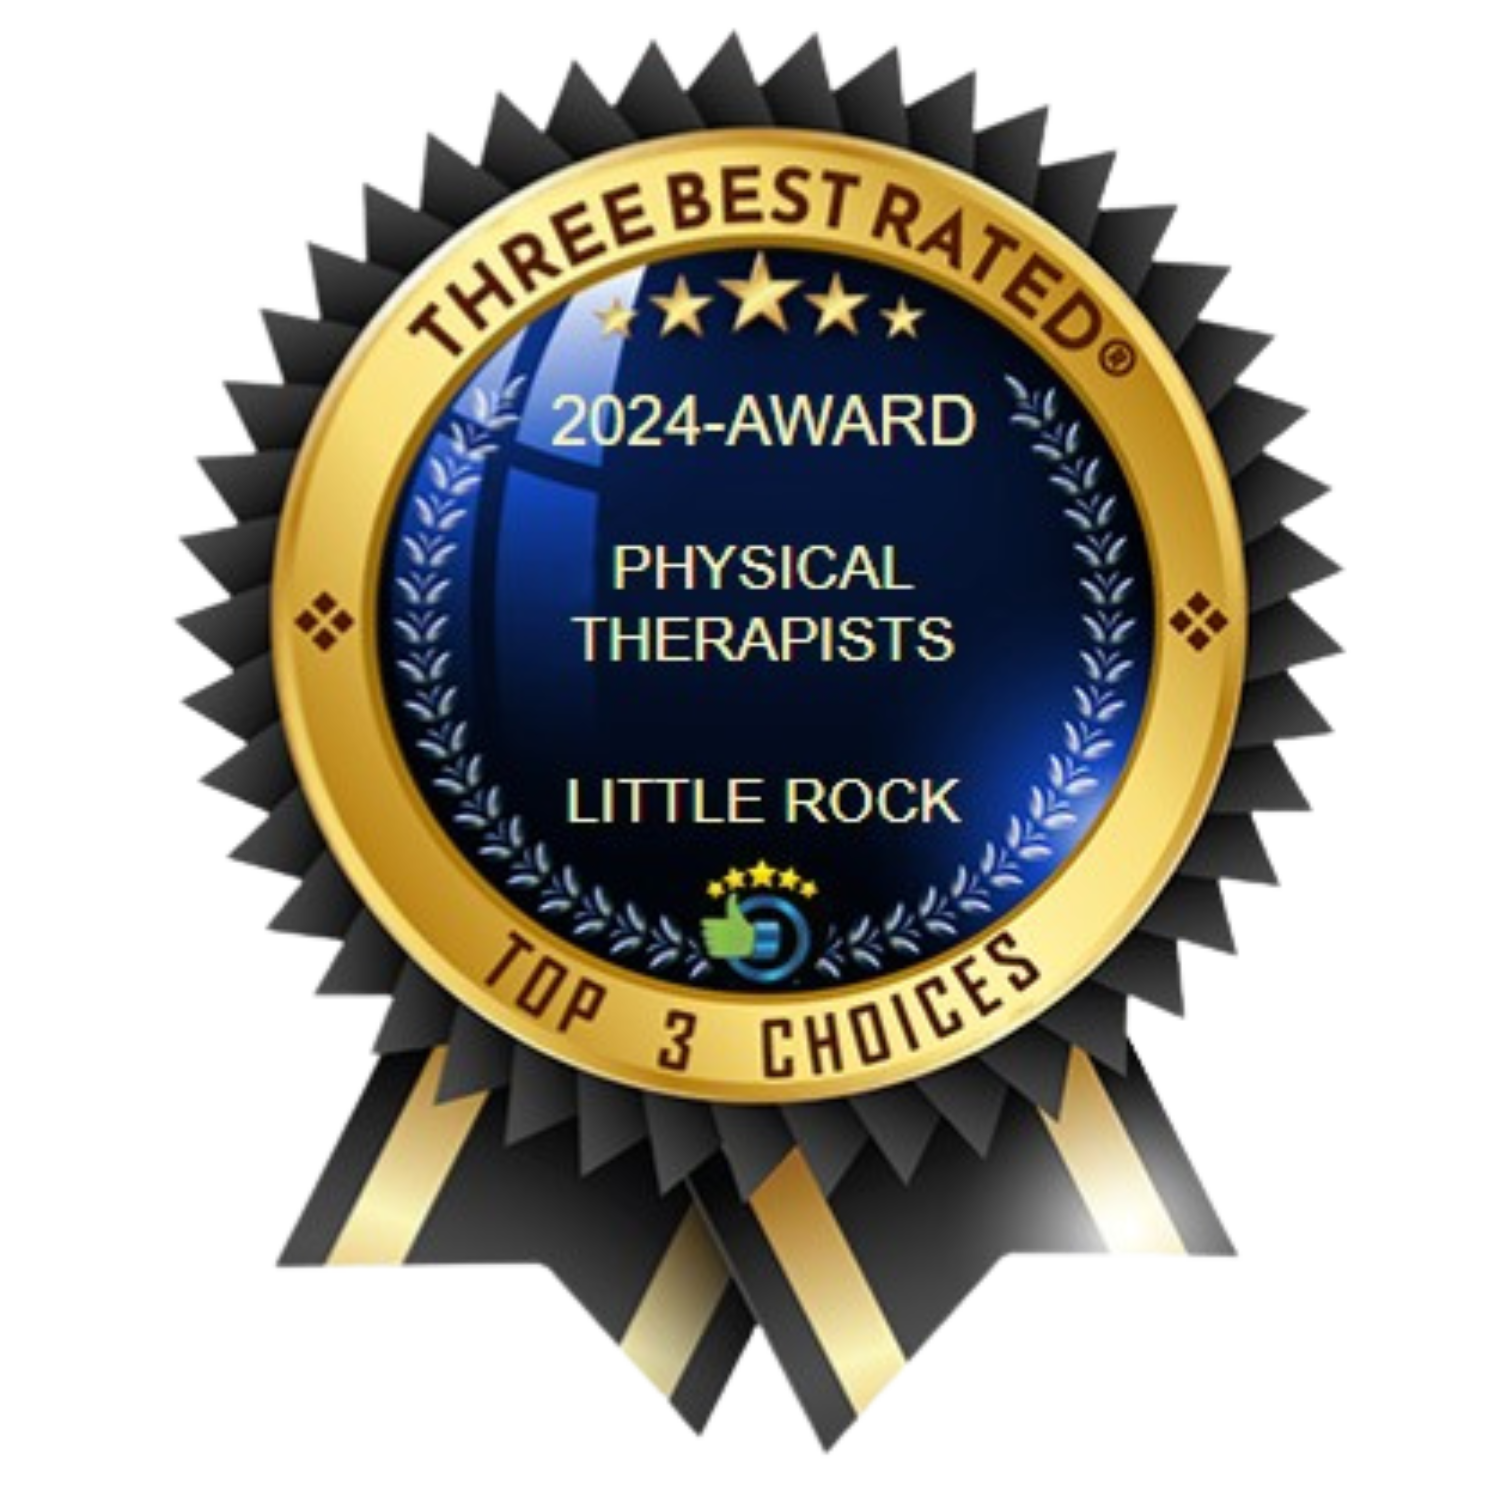 three best rated 2024 award physical therapists little rock top 3 choices